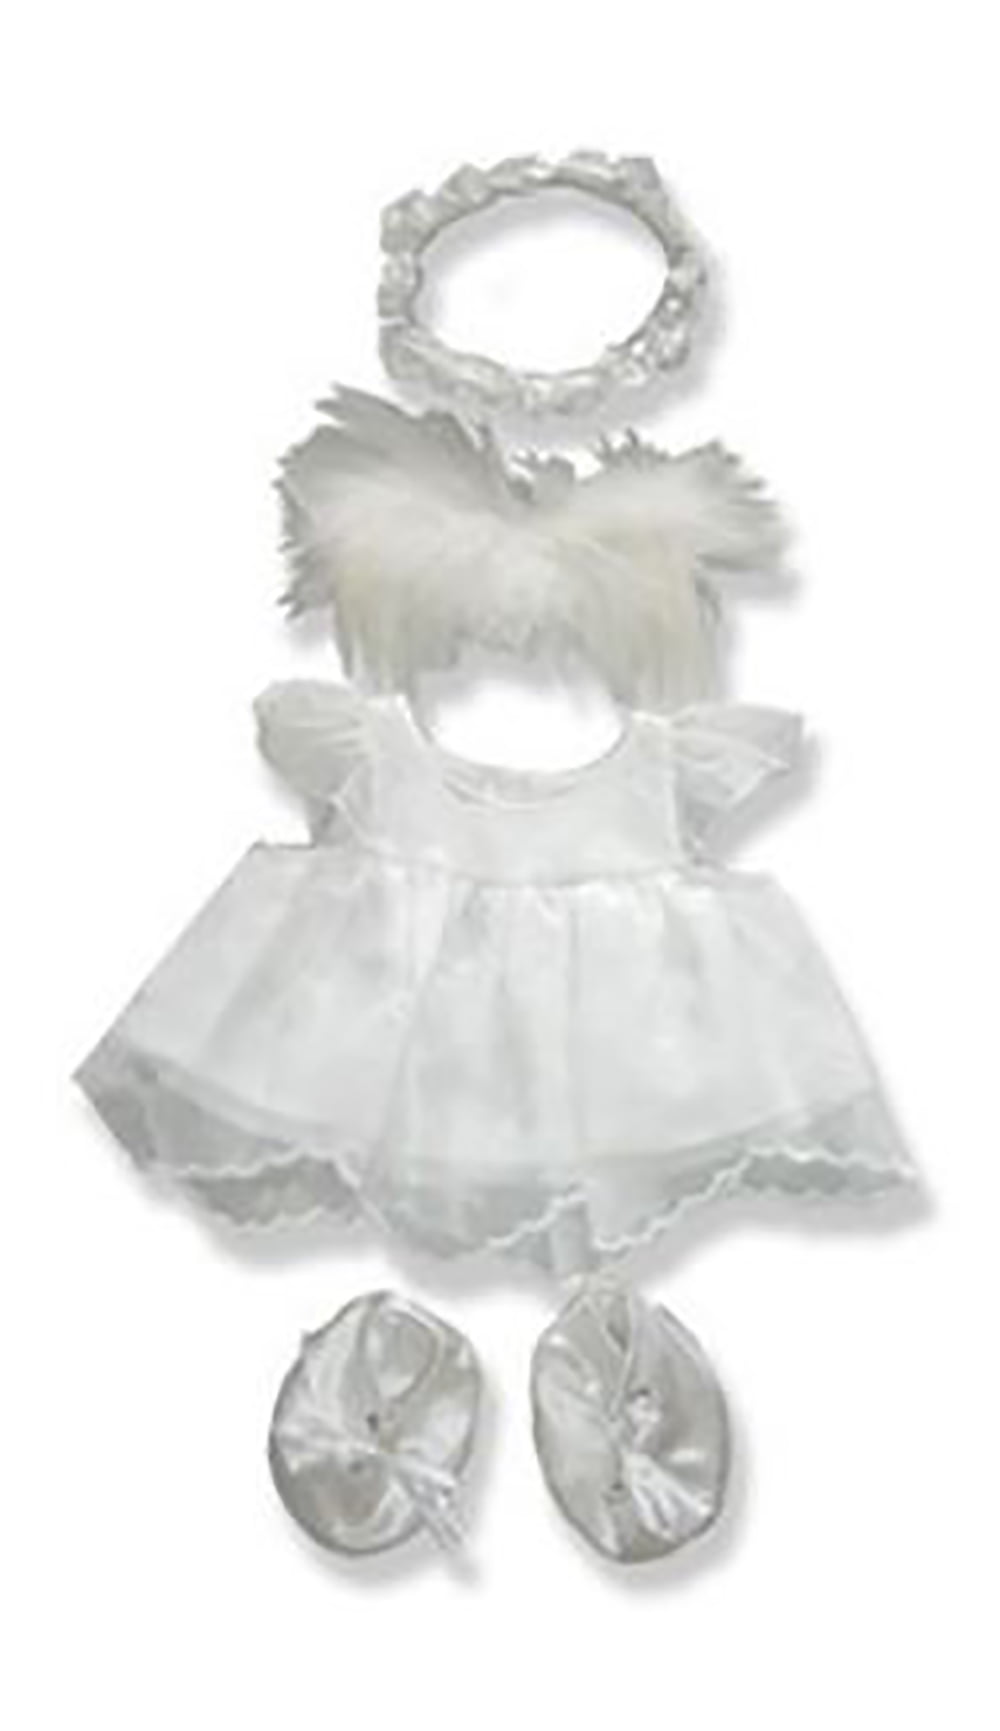 Teddy Bear Clothes Fits Build a Bear Teddies Winter White Silver Outfit Headband 